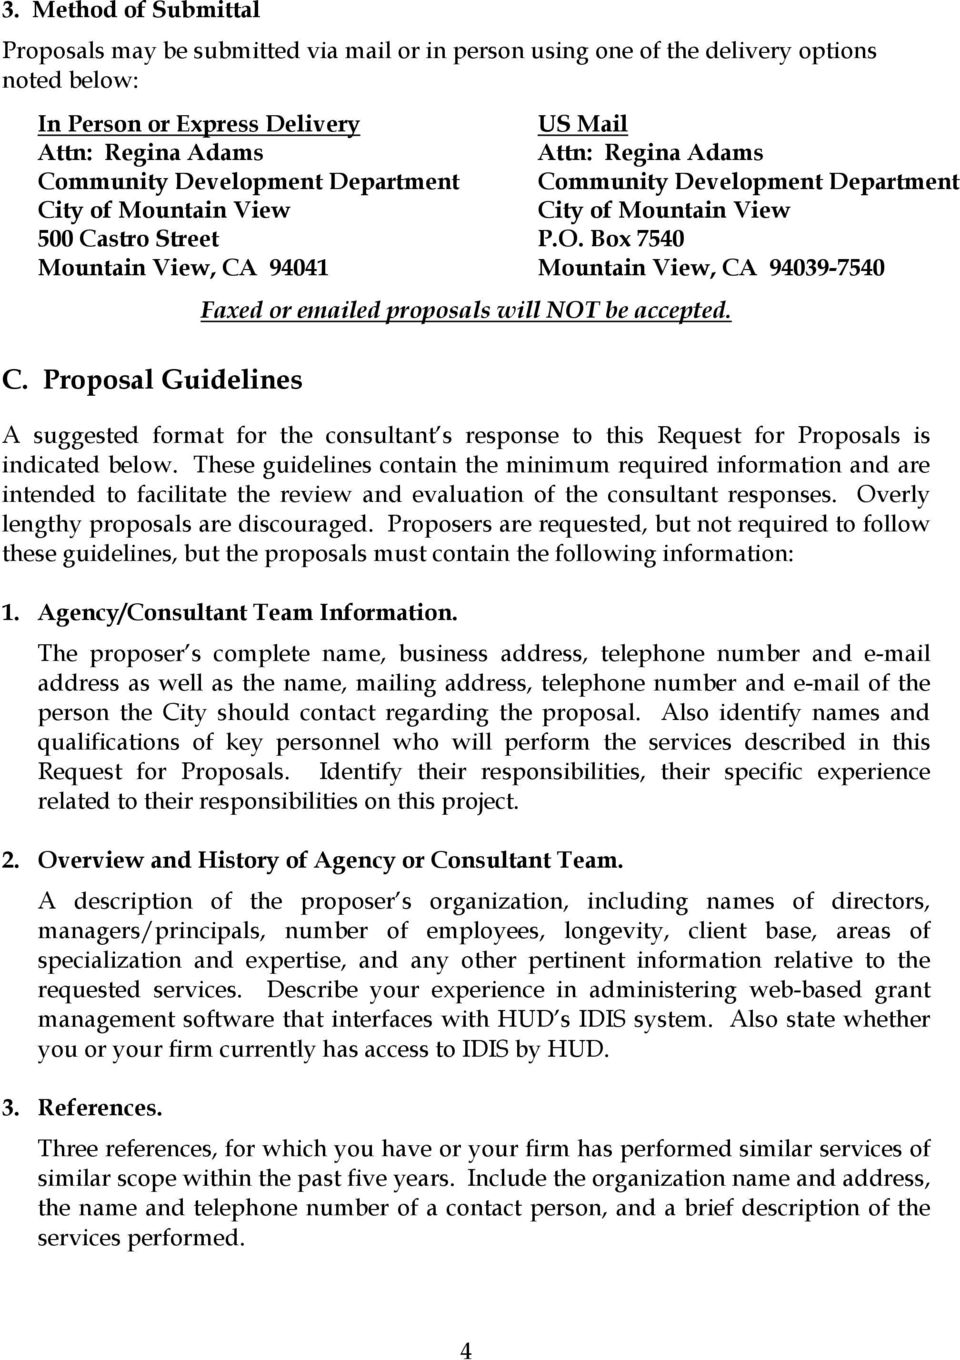 Proposal Guidelines Faxed or emailed proposals will NOT be accepted. A suggested format for the consultant s response to this Request for Proposals is indicated below.